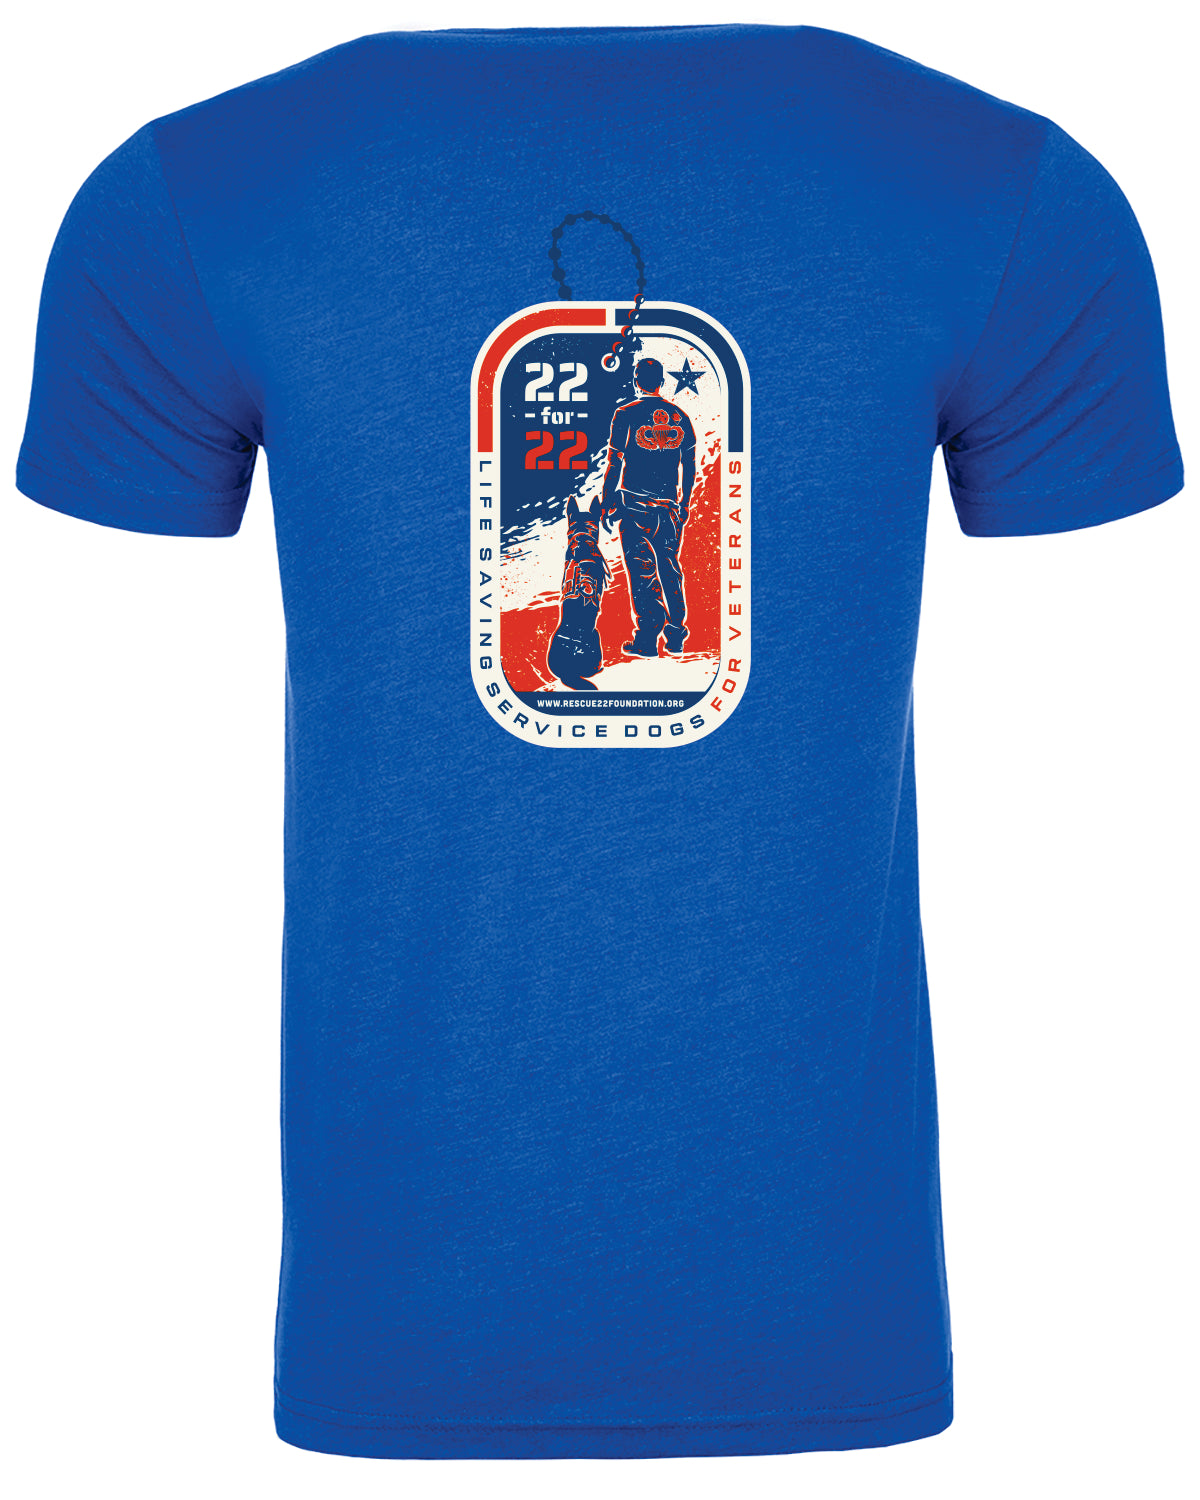 22 for 22 T-shirt